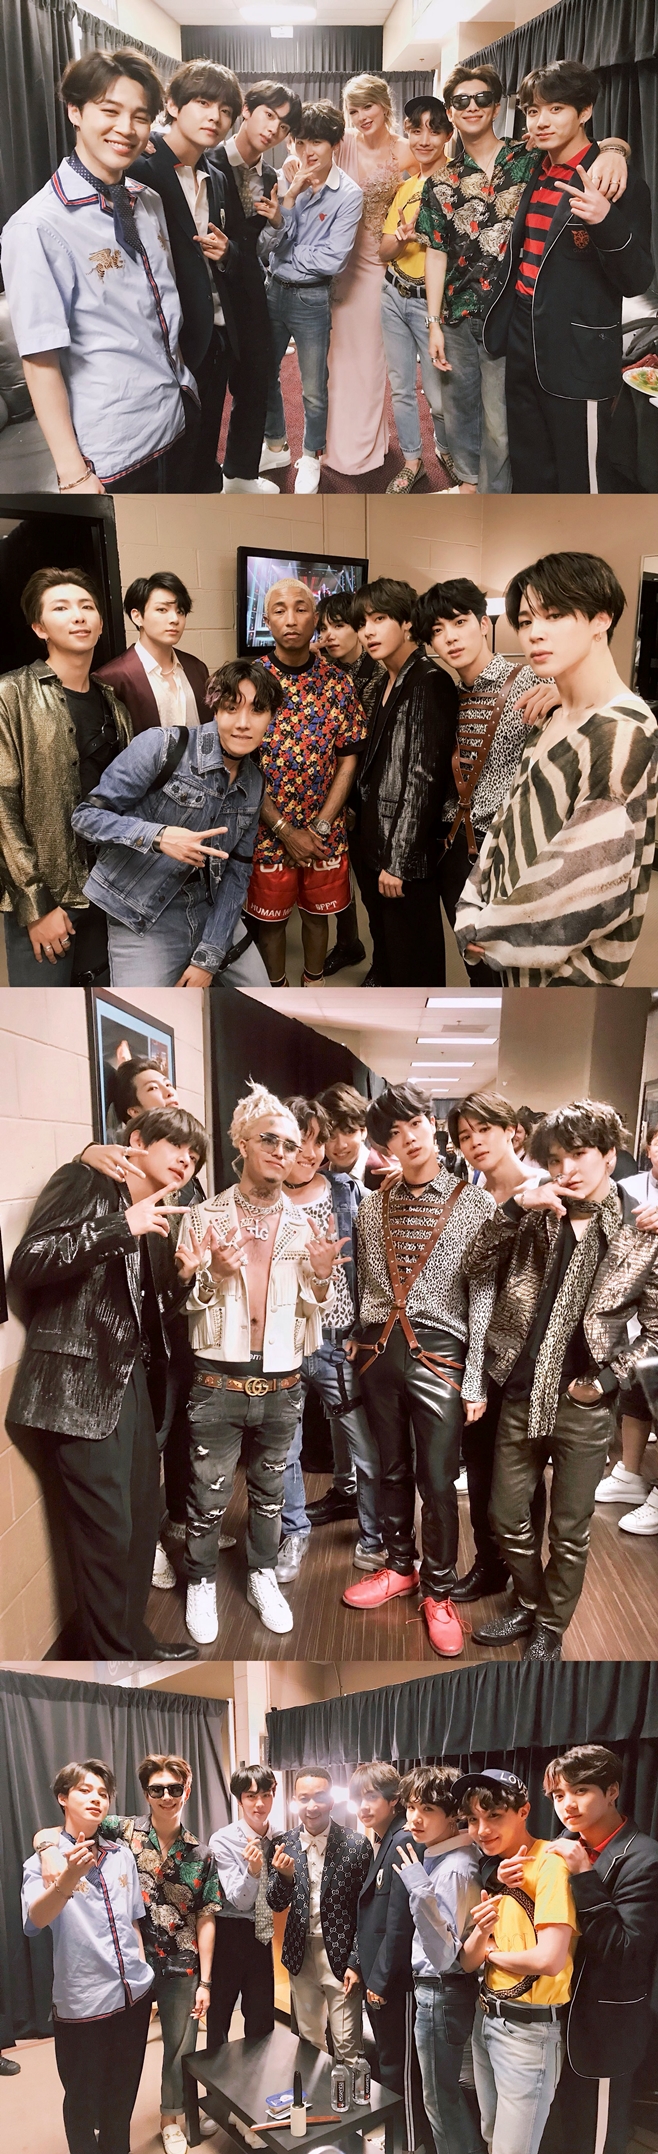 <p>Group Dark & ​​amp; Wild showed off his network with worldwide stars who attended the Billboards Music Awards.</p><p>On the morning of 21 (Korean time), 2018 Billboards Music Awards was held at MGM Grand Garden Arena in Las Vegas, USA.</p><p>On this day Dark & ​​amp; Wild showed off his bottom power by winning the top social artist part for the second year in a row at the 2018 Billboards Music Awards. In addition, he decorated the comeback stage of the new song Fake Love released on the 18th on the Billboards stage, attracting worldwide attention.</p><p>Dark & ​​amp; Wild released a certification shot with the singers who attended the 2018 Billboards Music Award using their Twitter after the stage of Fay Club was over. Attracting attention attracting attention to worldwide singers such as Taylor Swift, John Legend, Farrell Williams, Lille Farm and others.</p><p>Meanwhile, at the 2018 Billboards Music Awards, Ariana Grande (Ariana Grande), Dua Lipa, California Clarkson, Shawn Mendes, John Legend, Janet Jackson, Kamirakabe fee and others are gorgeous I decorated the stage.</p>